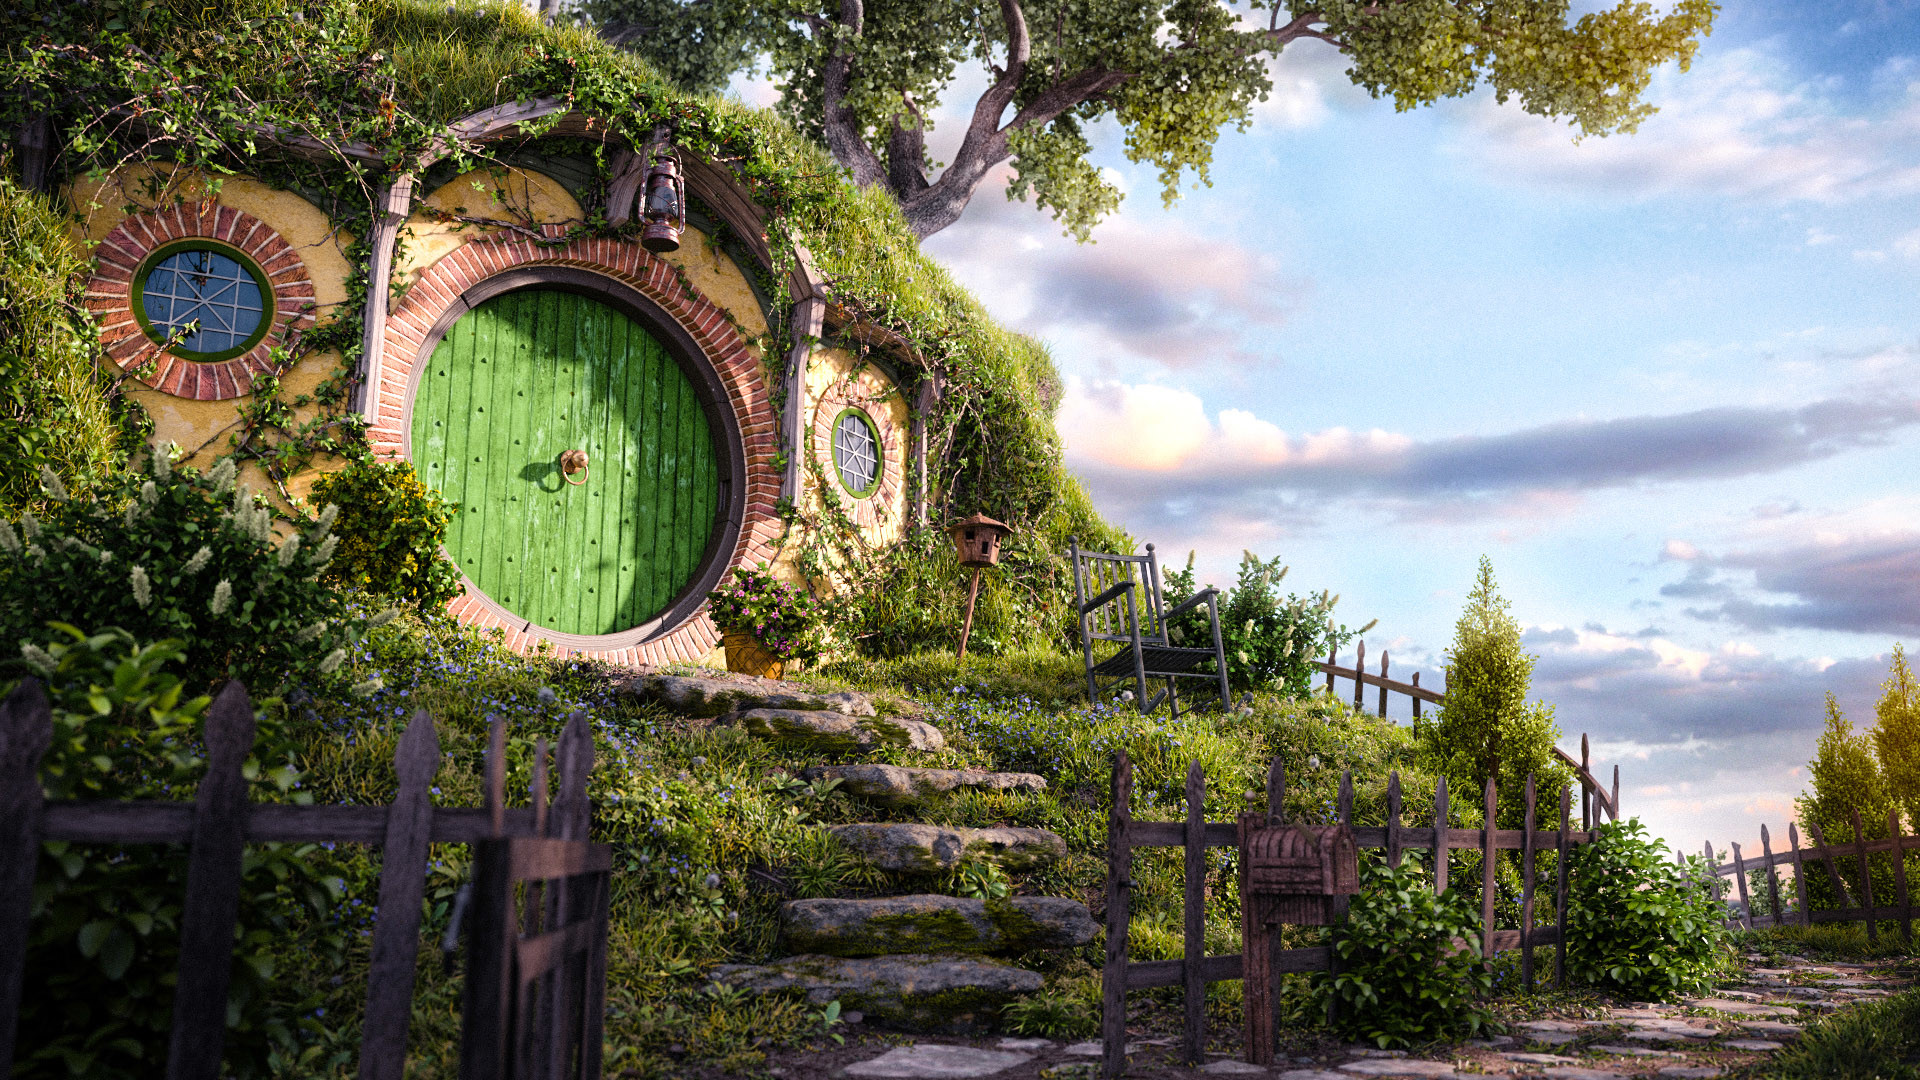 Bag End The Shire The Lord Of The Rings House Artwork Digital Art The Hobbit J R R Tolkien Hobbiton 1920x1080